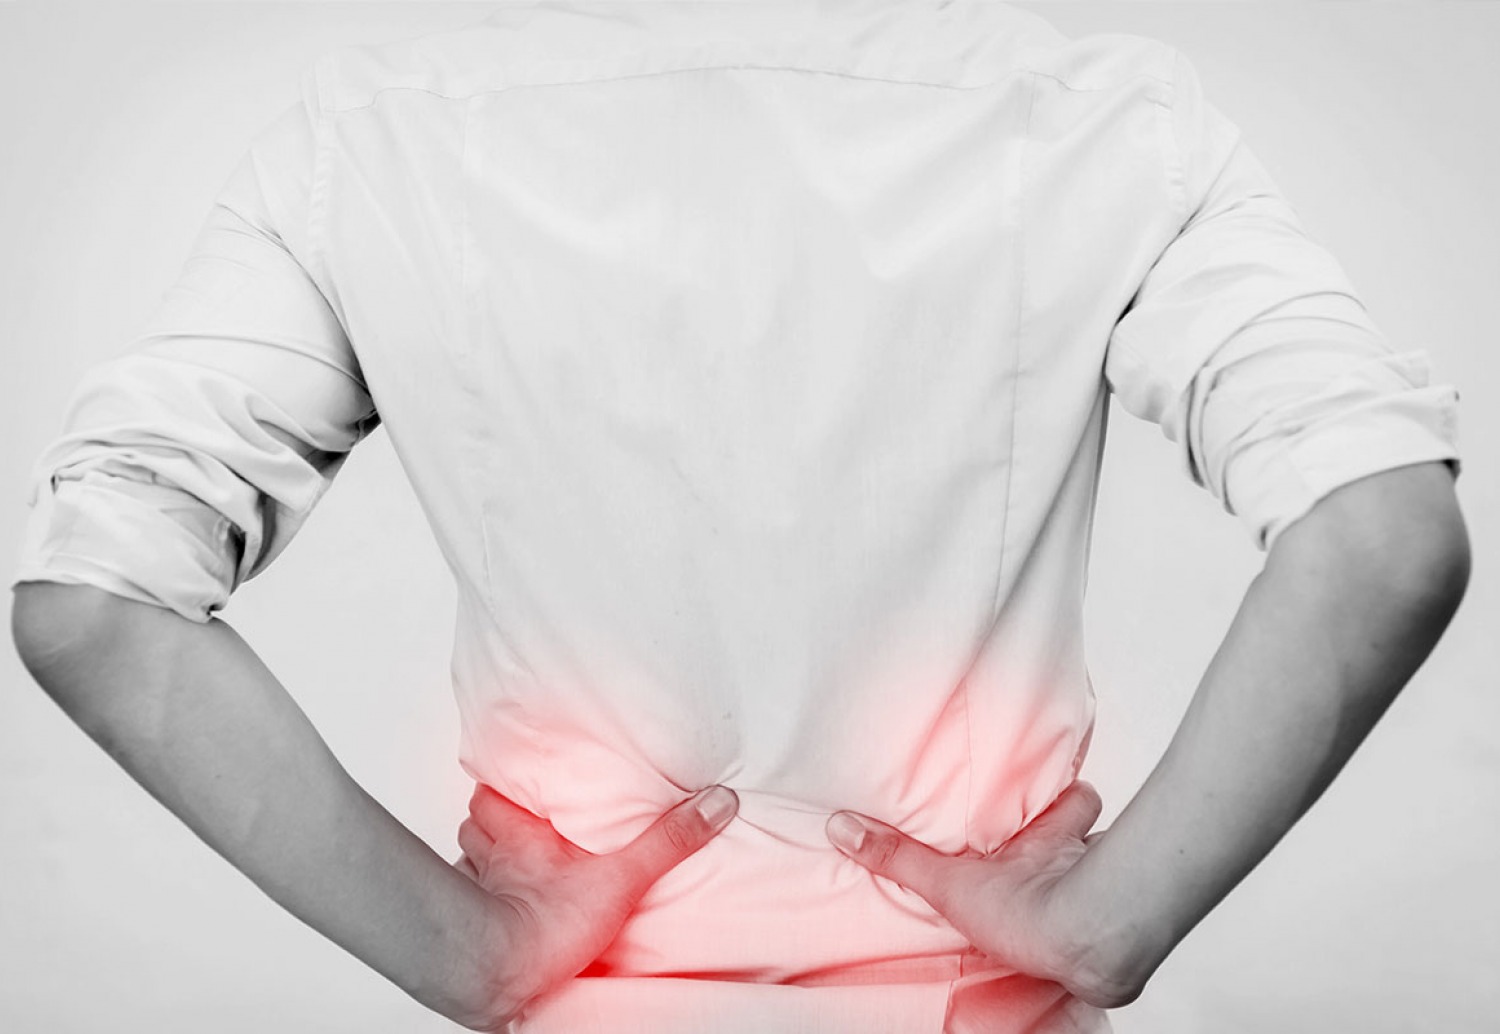 best treatment for back pain in Mumbai